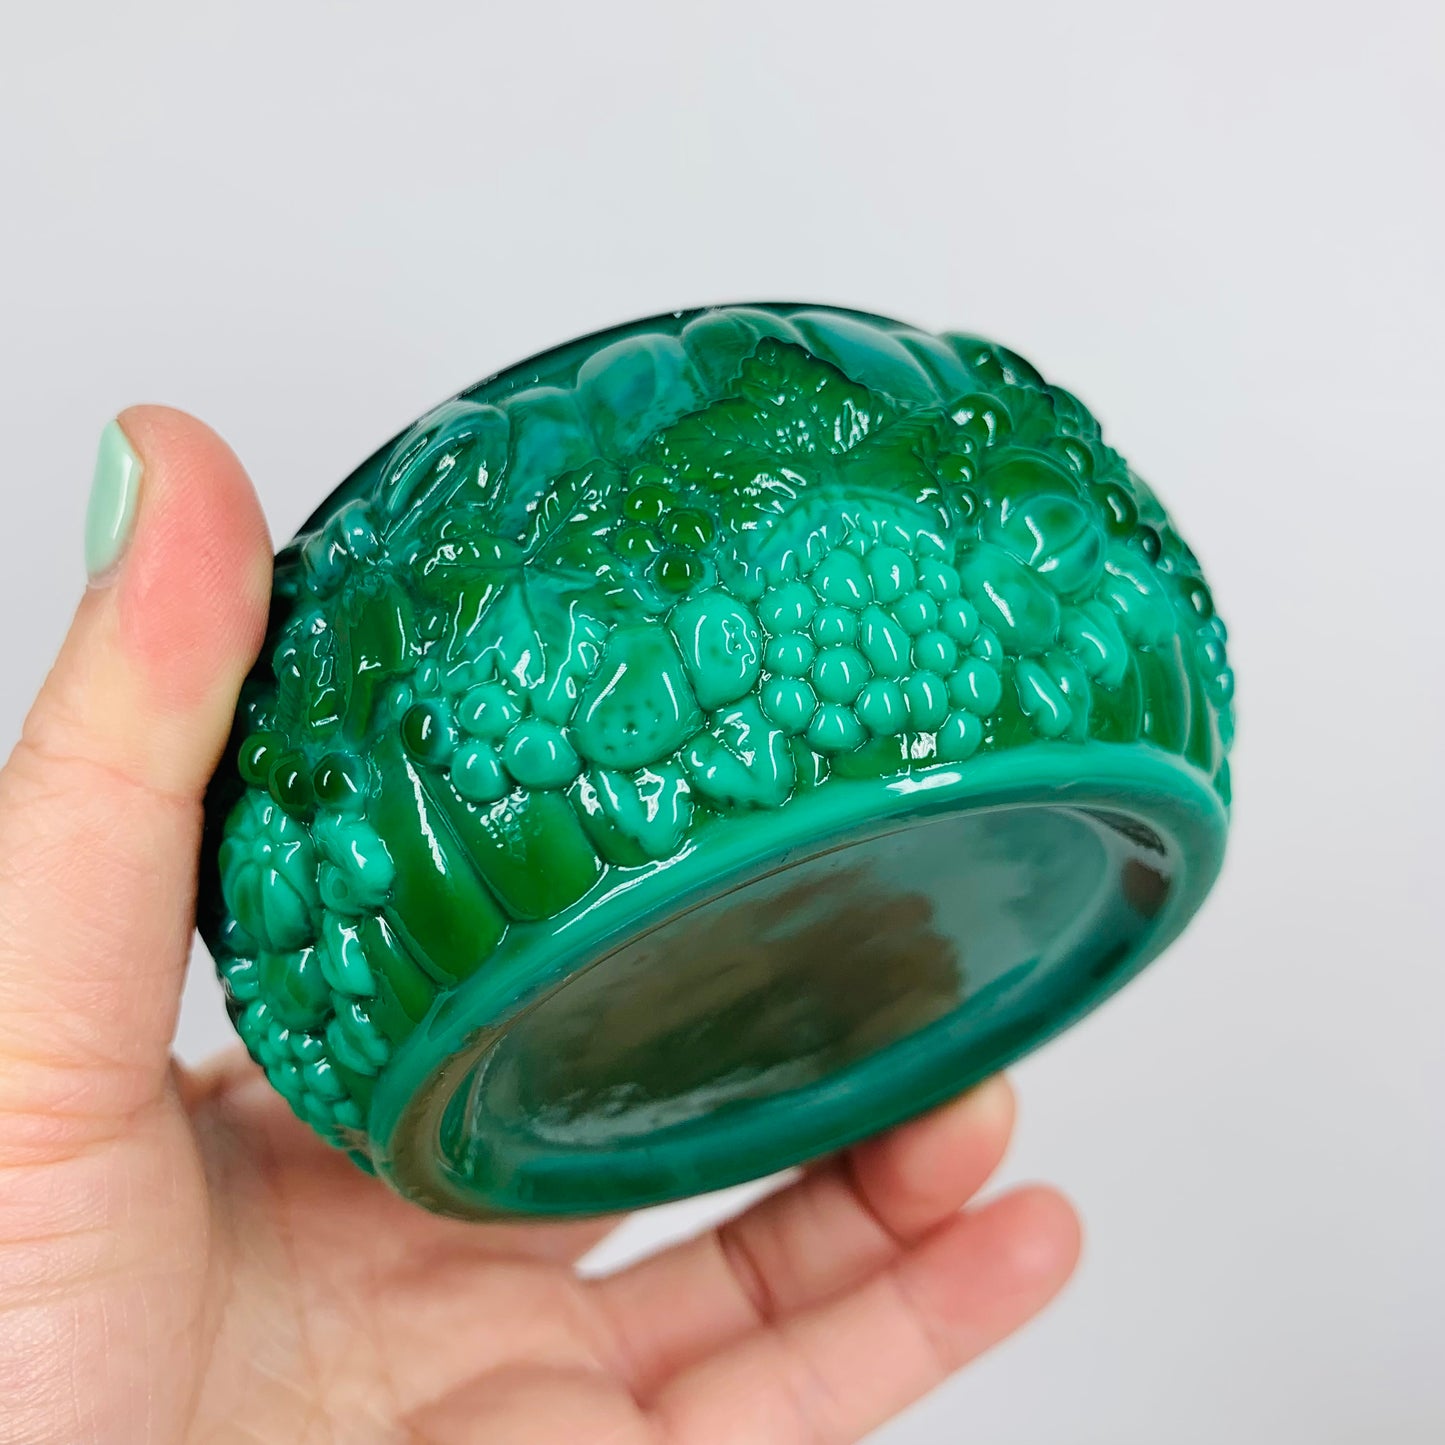 Extremely rare antique Art Deco hand carved Bohemian malachite lidded box with fruit and vine motif